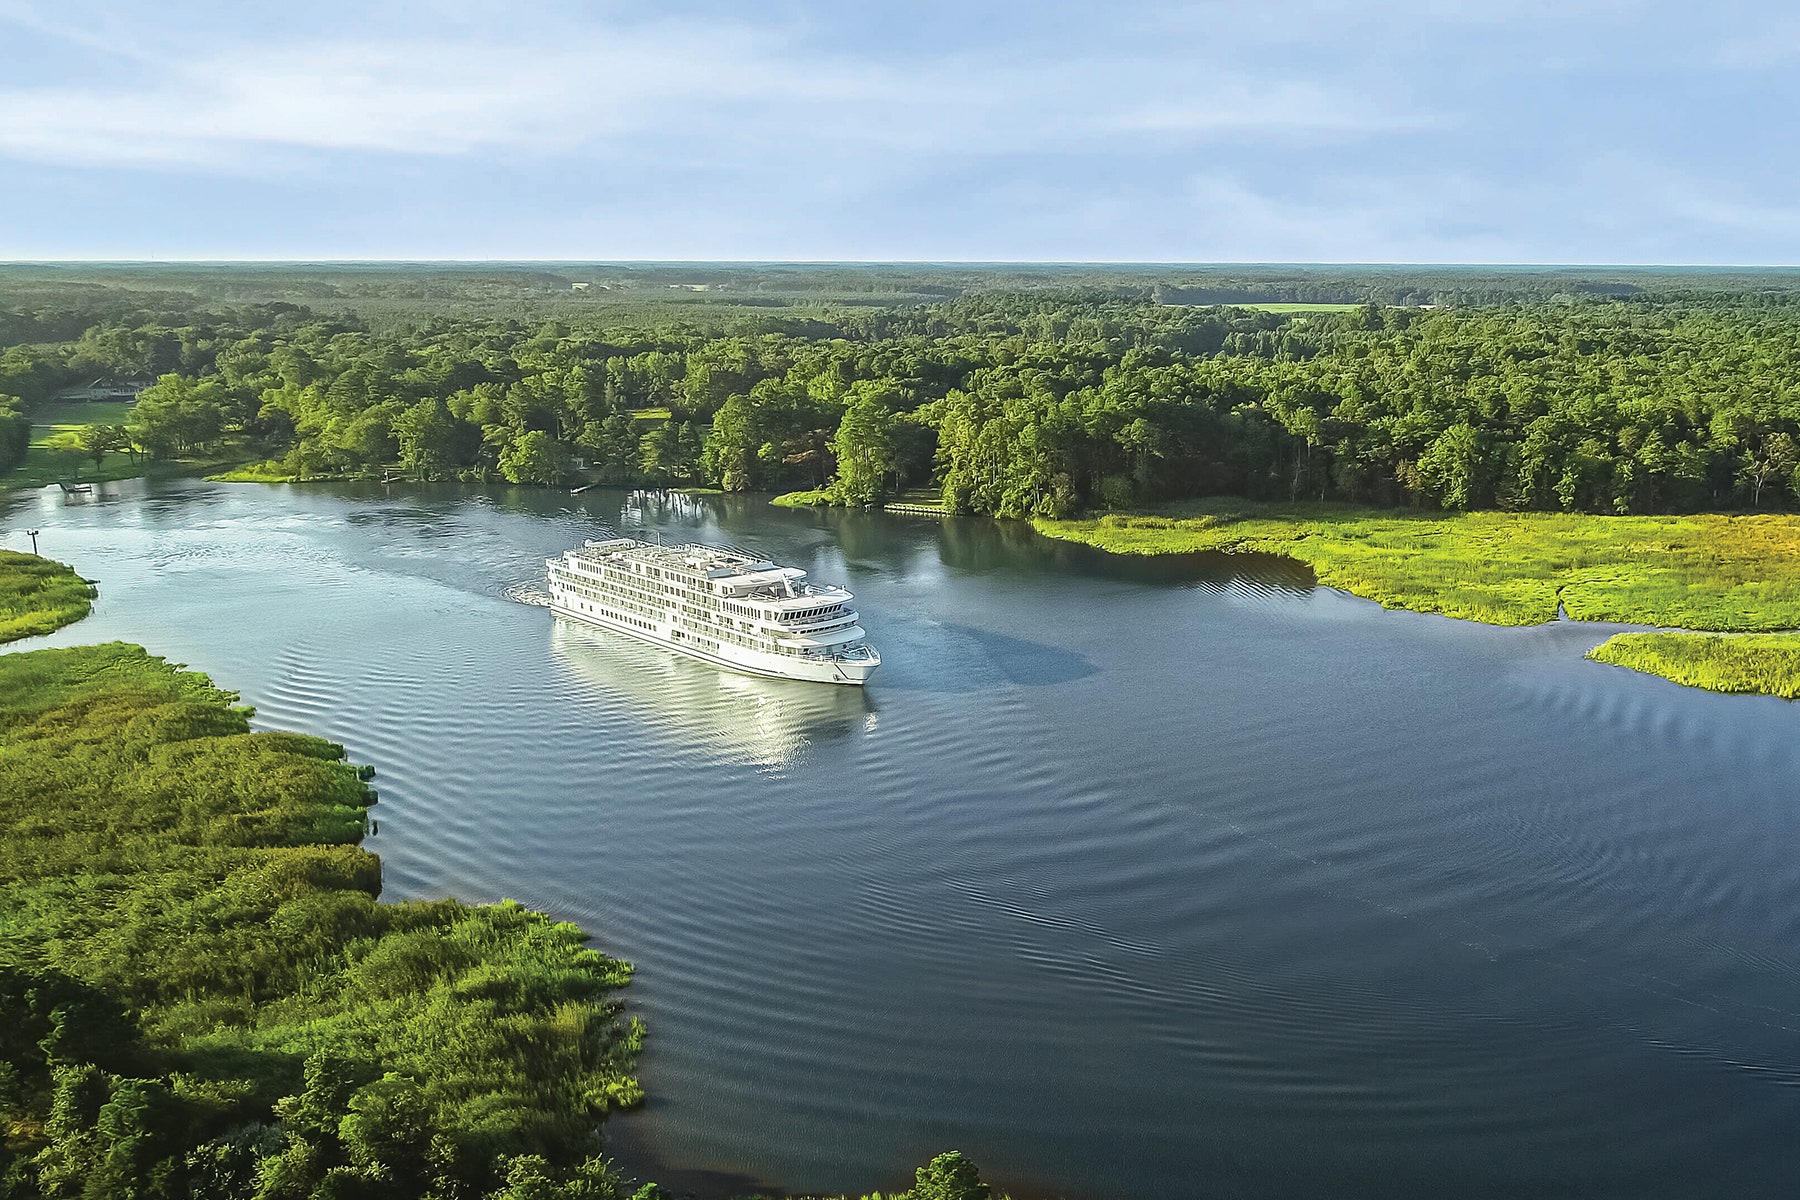 <p>The luxury ships and historic tours are nice, yes. But the real star of <a href="https://www.cntraveler.com/story/exploring-another-side-of-the-mississippi-along-the-great-river-road?mbid=synd_msn_rss&utm_source=msn&utm_medium=syndication">Mississippi River</a> cruises has always been the river. There’s nothing quite so Americana as getting to know the many personalities of this 2,350-mile stretch, flowing from northern <a href="https://www.cntraveler.com/story/in-minnesota-the-thrill-of-wild-ice-skating?mbid=synd_msn_rss&utm_source=msn&utm_medium=syndication">Minnesota’s</a> Lake Itasca through 10 states until it reaches <a href="https://www.cntraveler.com/tag/louisiana?mbid=synd_msn_rss&utm_source=msn&utm_medium=syndication">Louisiana</a>, where the Mississippi River Delta gives way to the Gulf of Mexico.</p> <p>The slow, meandering journeys of Mississippi River <a href="https://www.cntraveler.com/gallery/best-cruise-ships-gold-list?mbid=synd_msn_rss&utm_source=msn&utm_medium=syndication">cruises</a> have long proven an ideal way to discover the distinct stories of America’s heartland. In the words of Mark Twain (which no Mississippi River story would be complete without), the towns and cities located on the mighty river's shores are “cheering to the spirit” and “reposeful as a dreamland,” with “nothing to hang a fret or a worry upon.”</p> <p>The challenge modern travelers now face is when, where, and how to go about this iconic <a href="https://www.cntraveler.com/story/us-cruises-that-sail-close-to-home?mbid=synd_msn_rss&utm_source=msn&utm_medium=syndication">American voyage</a>. Below, see our answers to these frequently asked questions, plus our favorite Mississippi River cruises to book in 2024.</p> <h2>Which cruise lines do Mississippi River cruises?</h2> <p>After American Queen Voyages shut down in February, only two Mississippi River <a href="https://www.cntraveler.com/galleries/2014-10-20/top-cruise-lines-readers-choice-awards-2014?mbid=synd_msn_rss&utm_source=msn&utm_medium=syndication">cruise lines</a> currently remain in operation.</p> <p>Celebrating its 50th anniversary, American Cruise Lines (ACL) is American-built and remains family-owned and American-crewed. ACL offers a Mississippi River fleet of three luxurious 180-passenger modern riverboats–<em>American Melody</em>, <em>American Symphony</em>, and <em>American Serenade</em>—plus two classic paddlewheel ships, the 180-passenger <em>American Splendor</em> and the 150-passenger <em>American Heritage.</em></p> <p>The new kid on the Mississippi is the <em>Viking Mississippi,</em> a 386-passenger, five-deck vessel that first set sail in September 2022. The cutting-edge cruise is Viking’s first US-built ship, adding to their fleet of more than 90 ocean, river, and <a href="https://www.cntraveler.com/story/family-friendly-expedition-cruises?mbid=synd_msn_rss&utm_source=msn&utm_medium=syndication">expedition vessels</a> navigating the world’s seven continents.</p> <h2>What is the average cost of a Mississippi River cruise?</h2> <p>For an 8- or 9-day cruise, the average cost of a Mississippi River cruise is around $4,000 per person in a stateroom. Although prices might seem high initially, many of these cruises include extras that aren’t always complimentary on ocean cruises such as free WiFi, at least one free shore excursion in every port, paid port taxes and fees, and a pre-cruise hotel stay. <a href="https://www.cntraveler.com/sponsored/story/experience-the-most-extraordinary-voyages-in-the-world-with-viking?mbid=synd_msn_rss&utm_source=msn&utm_medium=syndication">Viking</a> offers complimentary beer, wine, and soft drinks with onboard lunch and dinner. Meanwhile, American Cruise Lines offers complimentary beer, wine, cocktails, and soft drinks. Gratuities are also included in American Cruise Lines fares.</p> <h2>What is the best time of year to go on a river cruise?</h2> <p>Spring (late March through mid-June) and autumn (September through November) are the best times of year to go on a <a href="https://www.cntraveler.com/story/best-river-cruises-to-book-in-2023?mbid=synd_msn_rss&utm_source=msn&utm_medium=syndication">river cruise</a> in the US. Spring blossoms add a colorful touch to the shoreline, and you can never go wrong with autumn foliage. The temperatures are mild, if not pleasantly cool, and passengers are eager to welcome a new spring travel season—or to enjoy one last autumn river adventure before winter arrives.</p> <h2>What month is best for a Mississippi River cruise?</h2> <p>If we had to pick just one, September is the best month for a Mississippi River cruise. The weather is usually mild with less likelihood of rain, and autumn colors are beginning to paint the shoreline. Keep in mind, however, that the Mississippi is the fourth largest river in the world—so temperatures any time of year are not going to be the same in warmer Louisiana as they are in cooler Minnesota.</p> <p>Below, see our favorite Mississippi River cruises to book in 2024, featuring stops in iconic American cities like <a href="https://www.cntraveler.com/destinations/nashville?mbid=synd_msn_rss&utm_source=msn&utm_medium=syndication">Nashville</a>, <a href="https://www.cntraveler.com/story/best-places-to-go-in-2023?mbid=synd_msn_rss&utm_source=msn&utm_medium=syndication">Memphis</a>, and <a href="https://www.cntraveler.com/destinations/new-orleans?mbid=synd_msn_rss&utm_source=msn&utm_medium=syndication">New Orleans</a>.</p><p>Sign up to receive the latest news, expert tips, and inspiration on all things travel</p><a href="https://www.cntraveler.com/newsletter/the-daily?sourceCode=msnsend">Inspire Me</a>